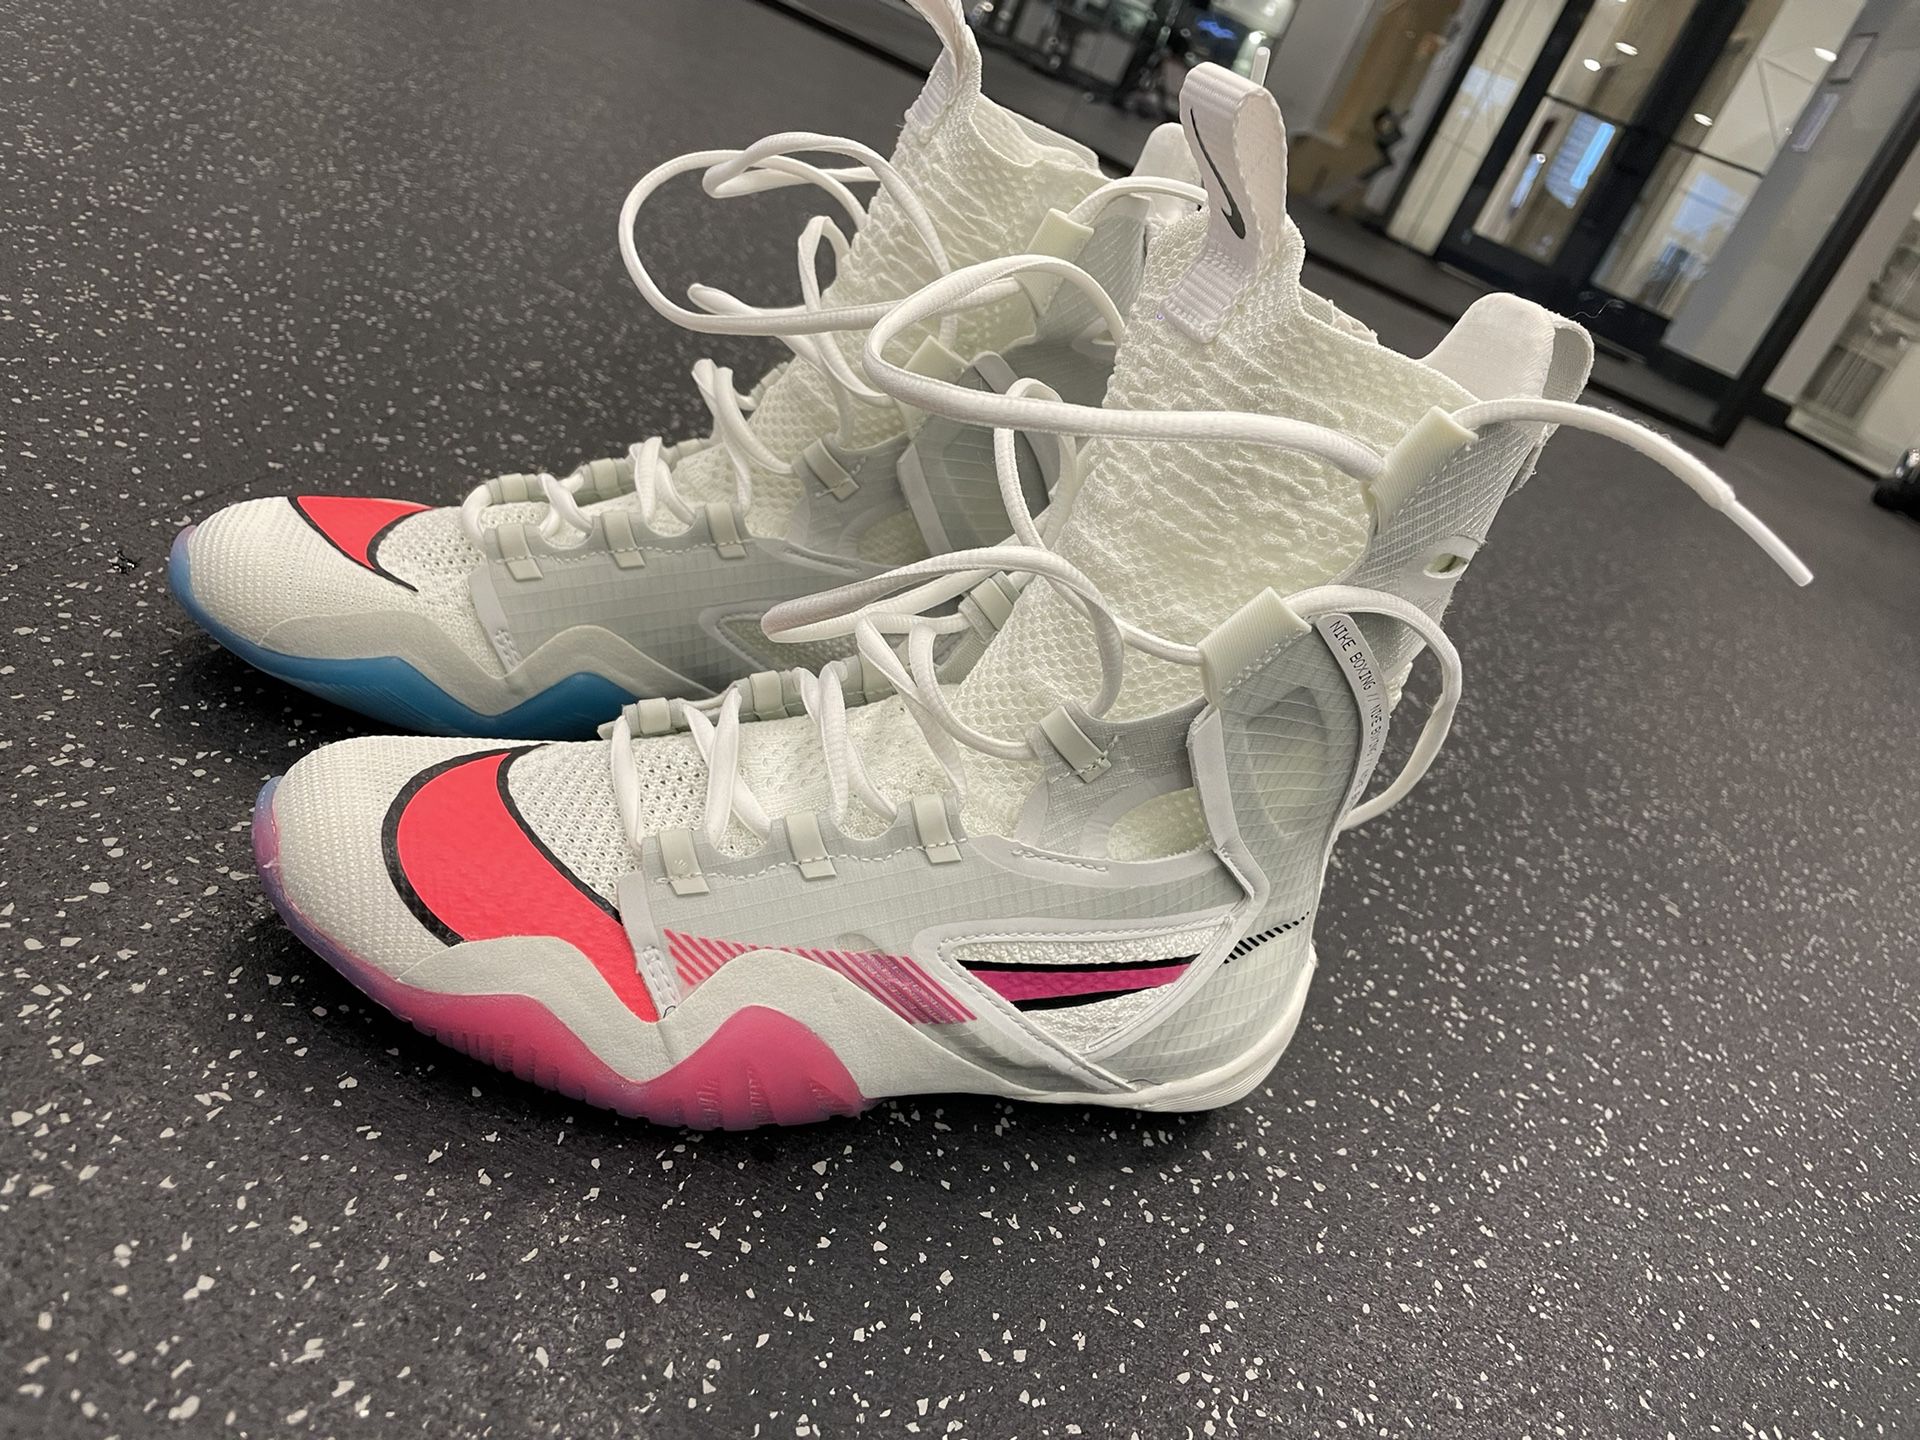 Boxing Shoes: NIKE HYPERKO 2 LIMITED EDITION - WHITE/HYPER VIOLET/LIGHT  BONE - Size 7 for Sale in North Arlington, NJ - OfferUp